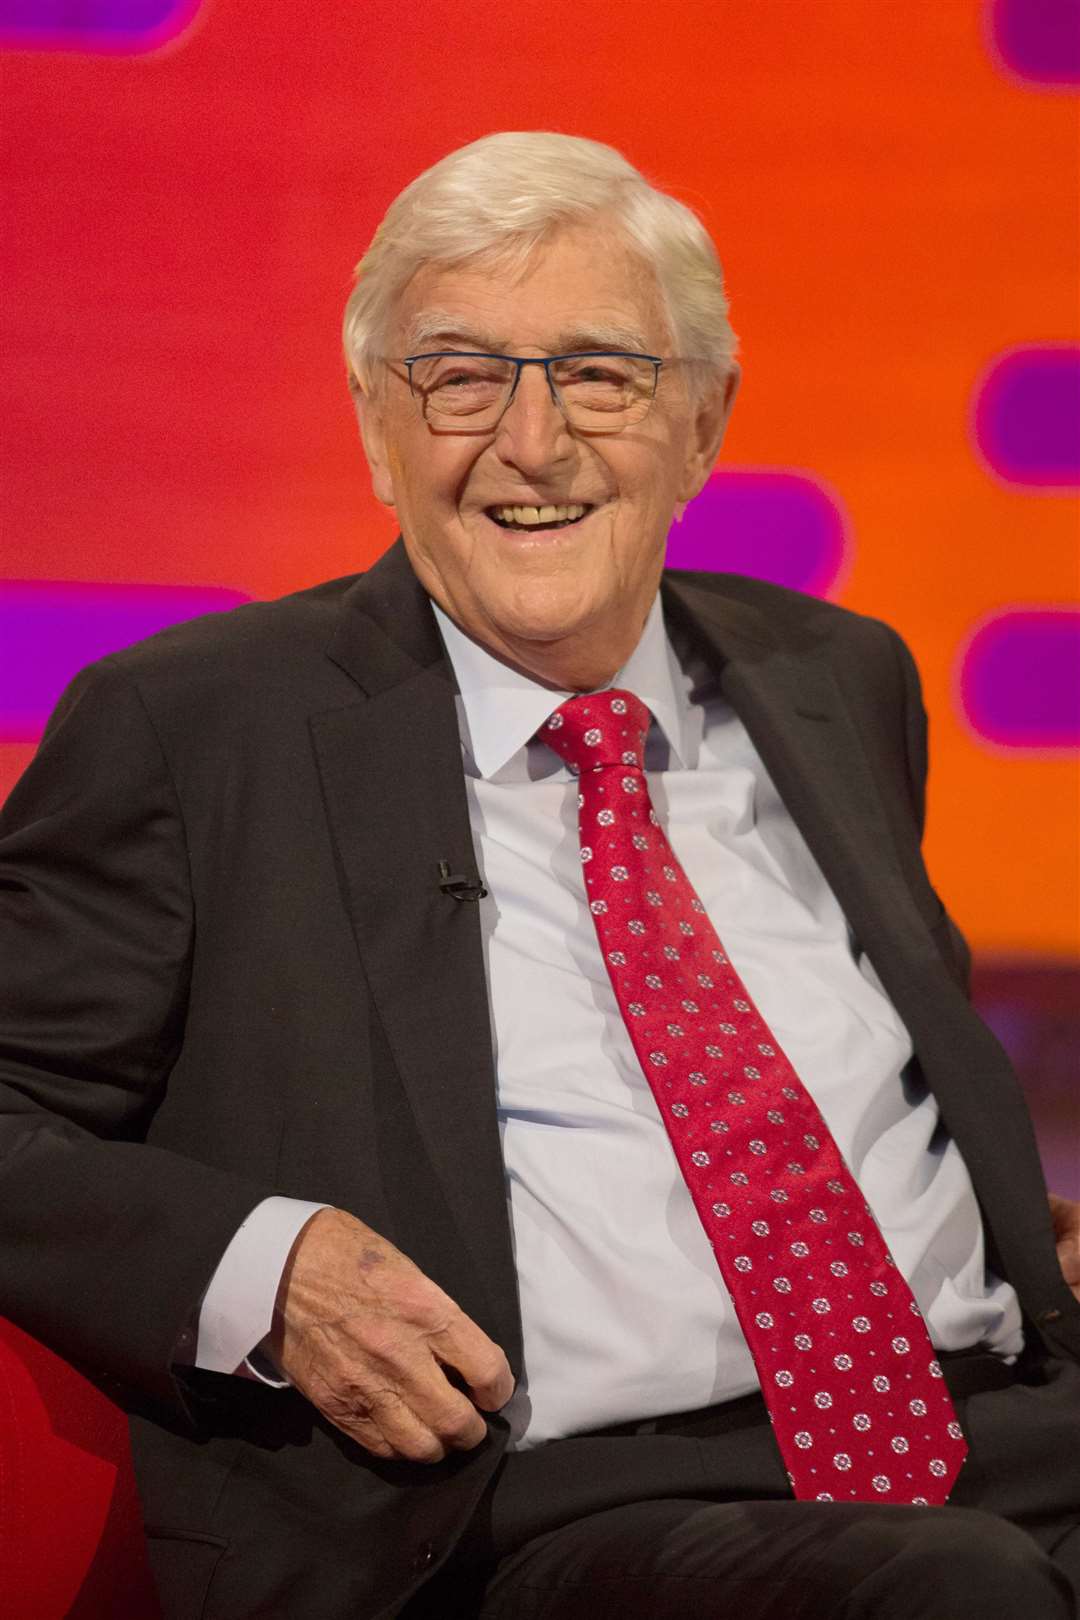 Sir Michael Parkinson during filming of the Graham Norton Show (PA)